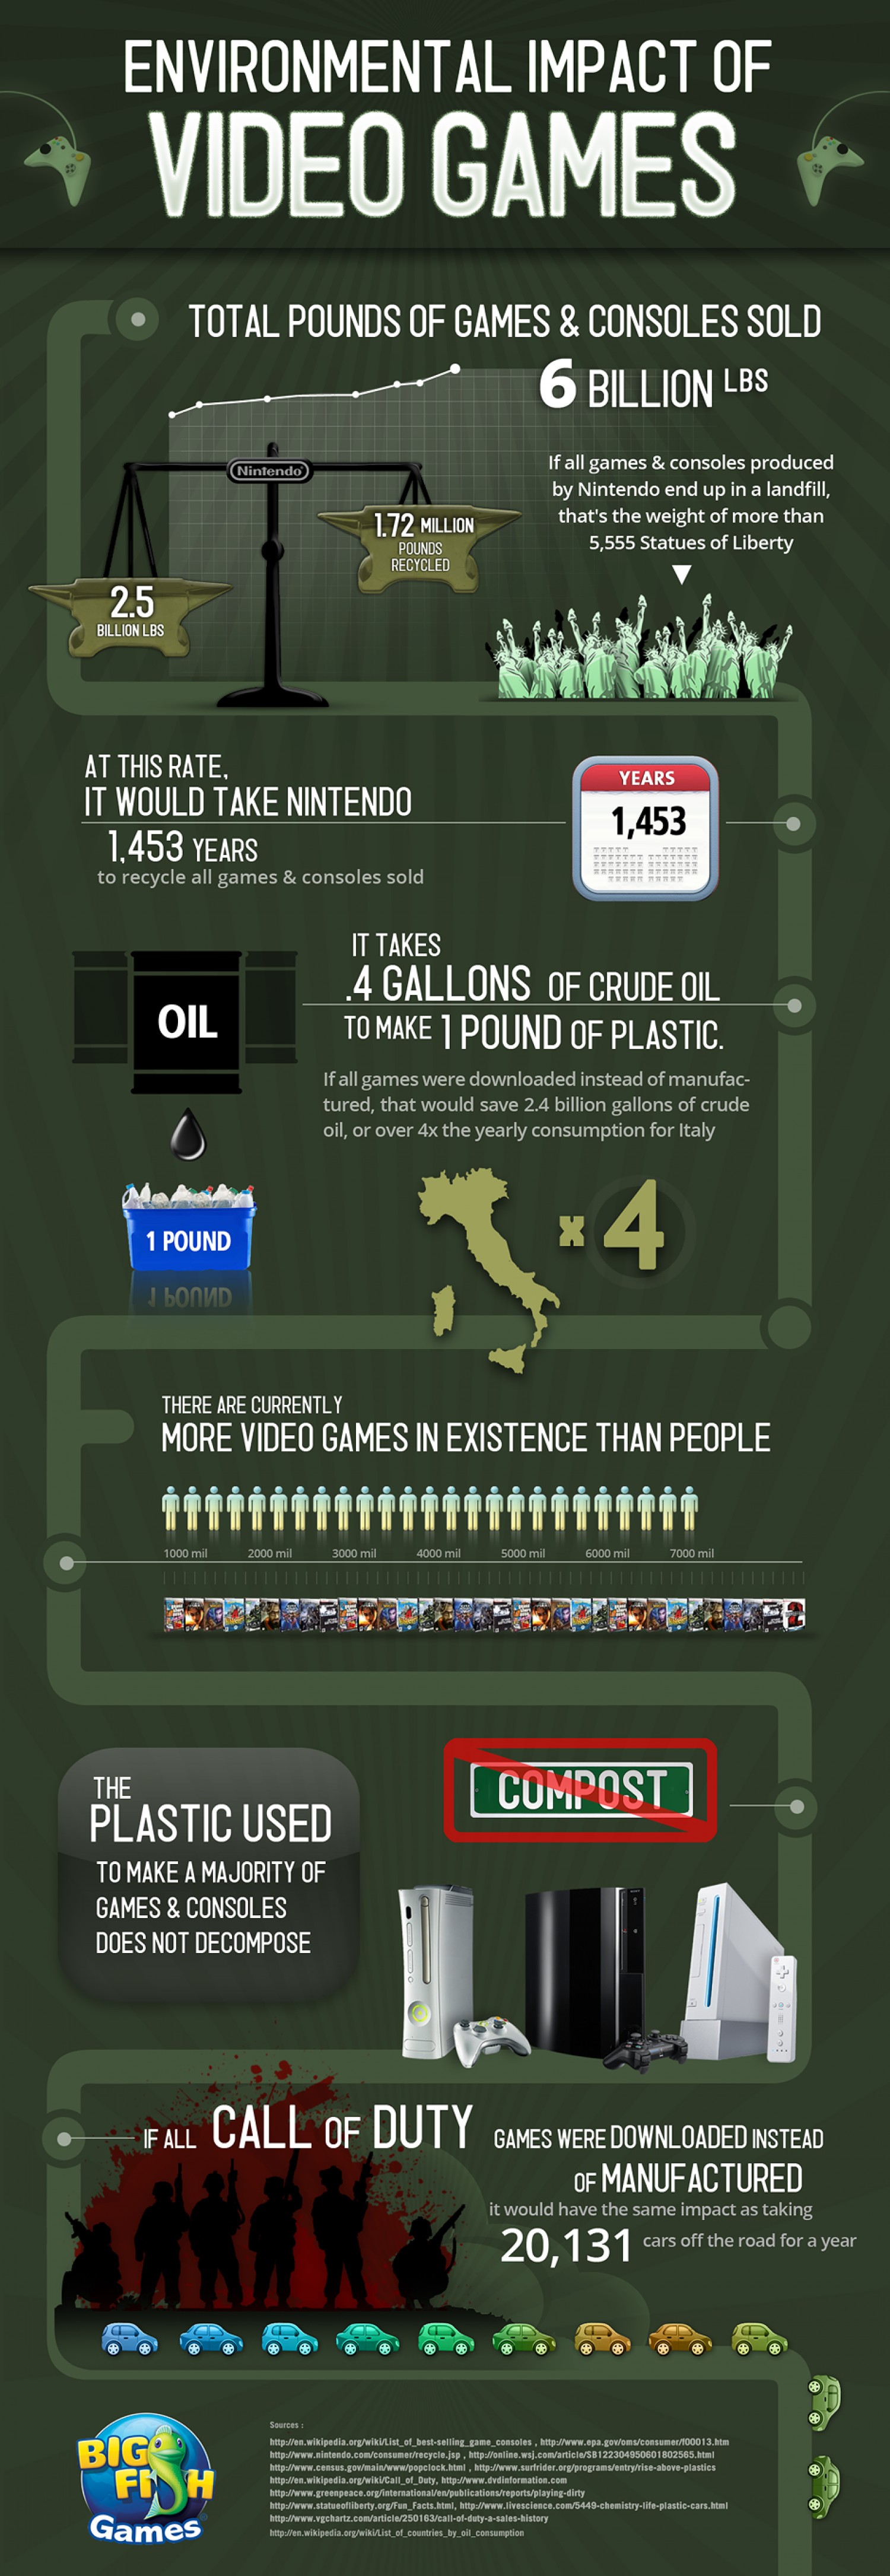 9. The Environmental Impact of Video Games